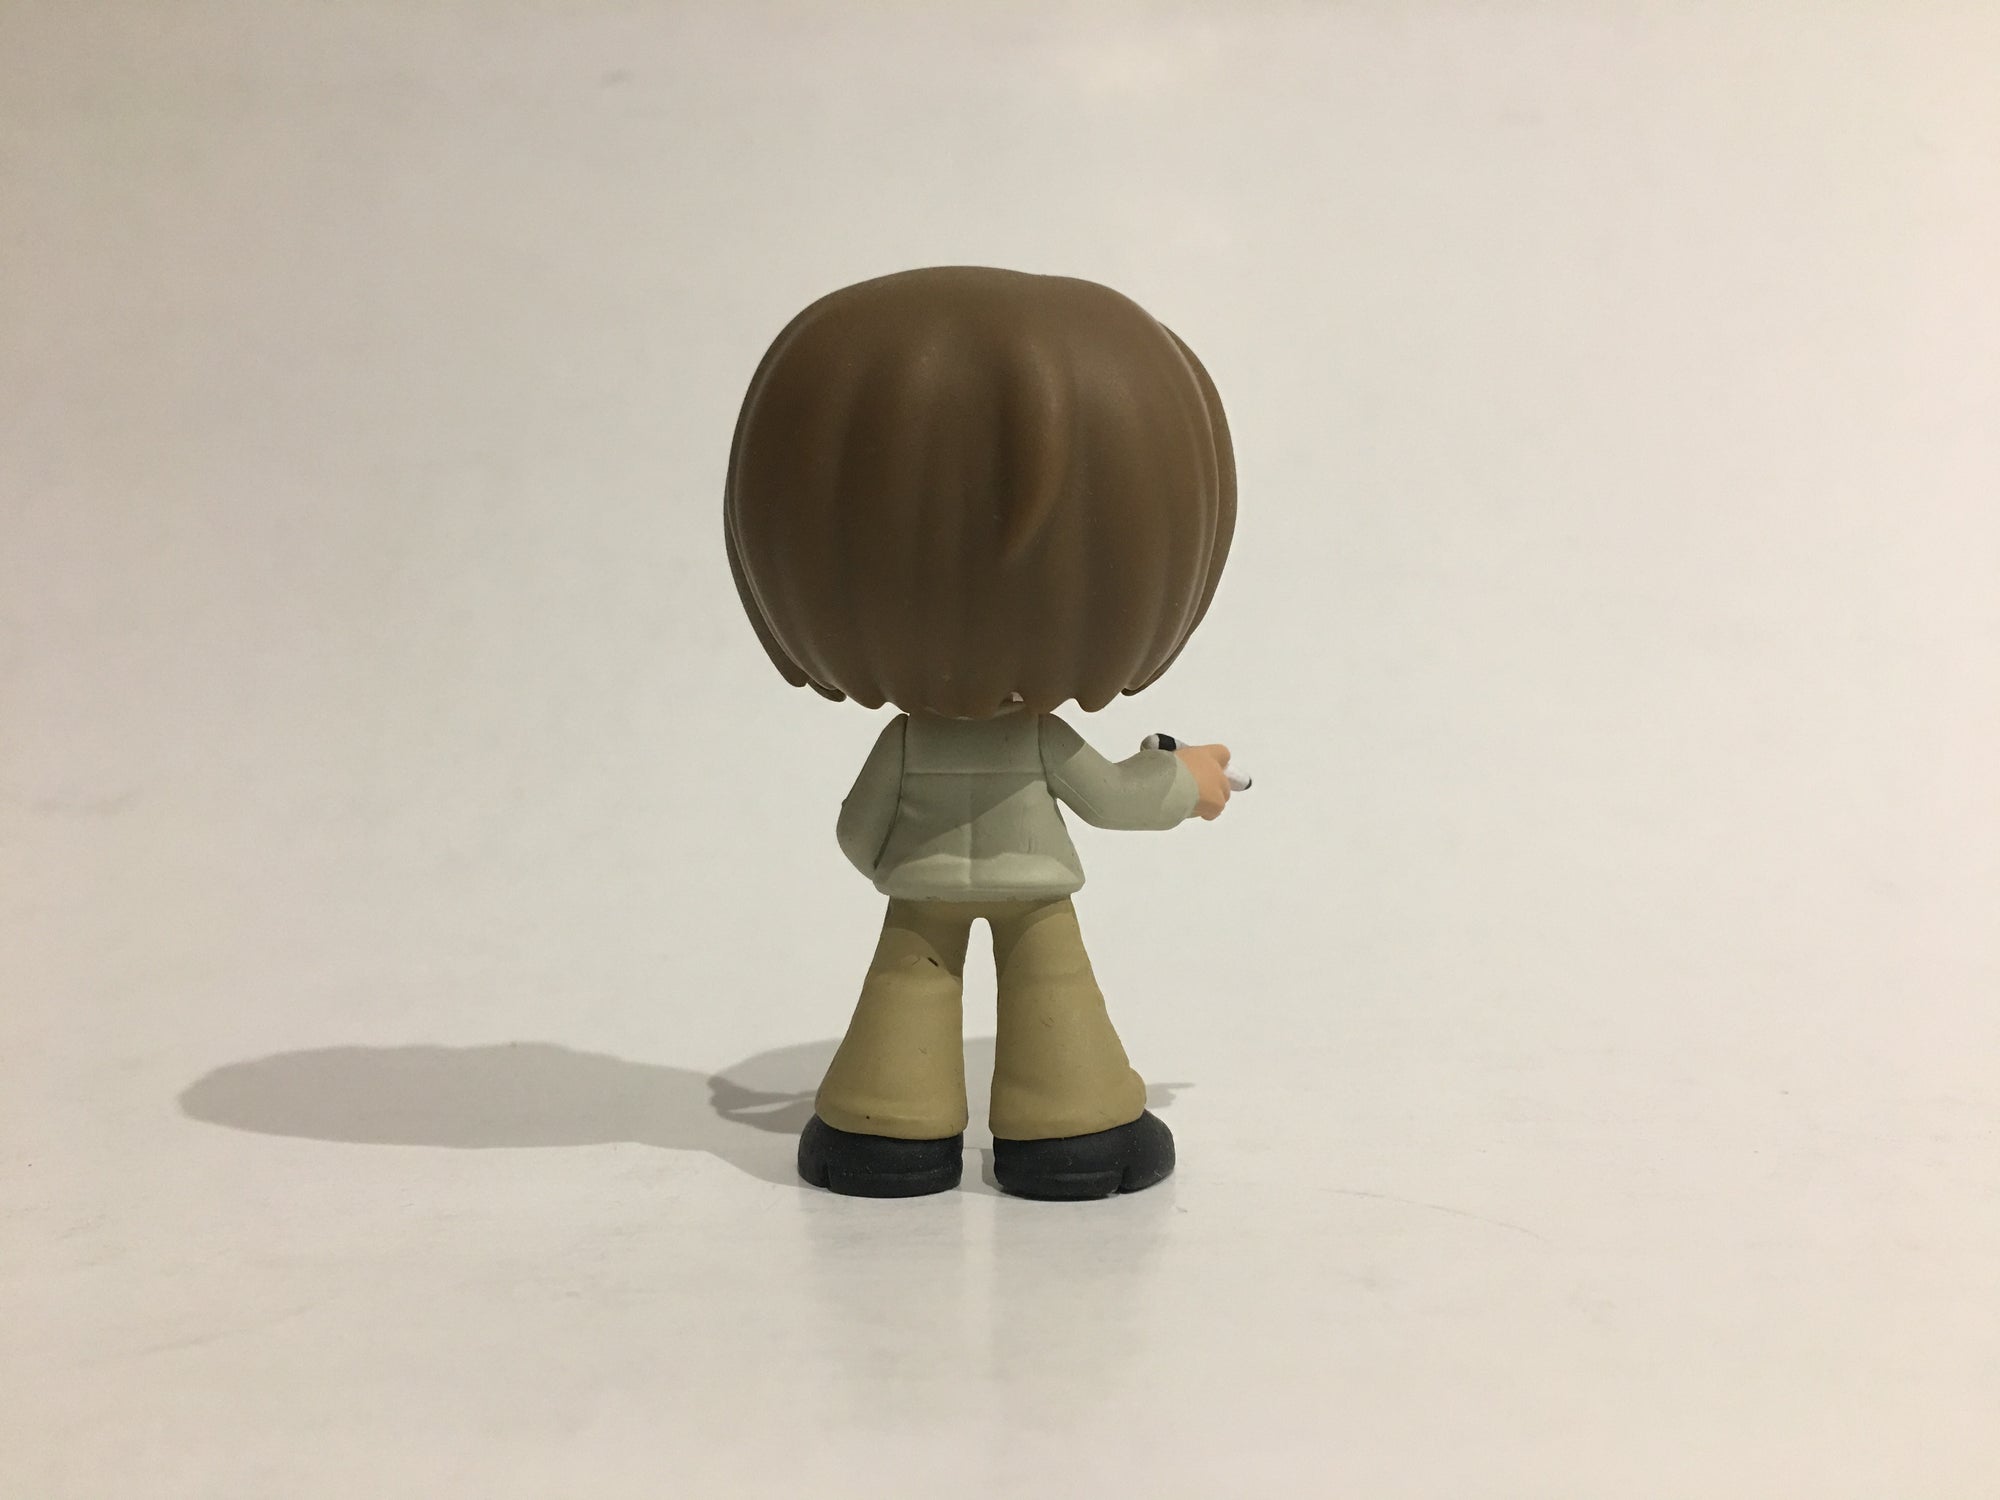 Shonen Jump Best of Anime Series 2 Blind Box - Death Note L from Funko Mystery Minis